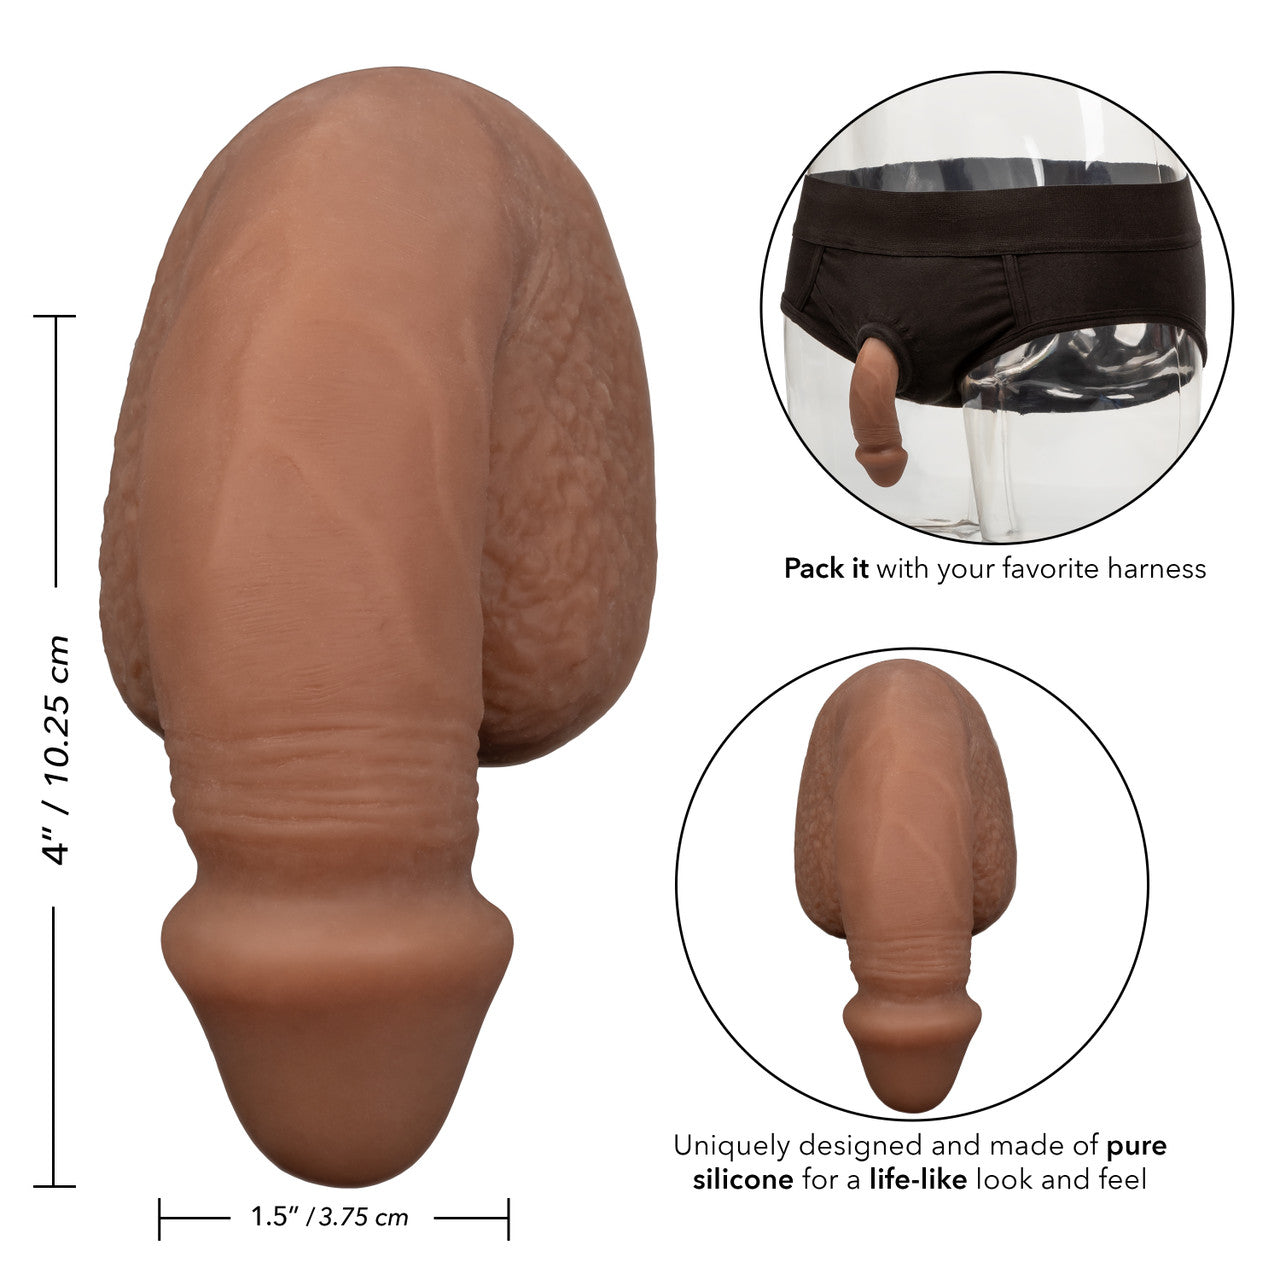 Packer Gear 4" Silicone Packing Penis - Brown